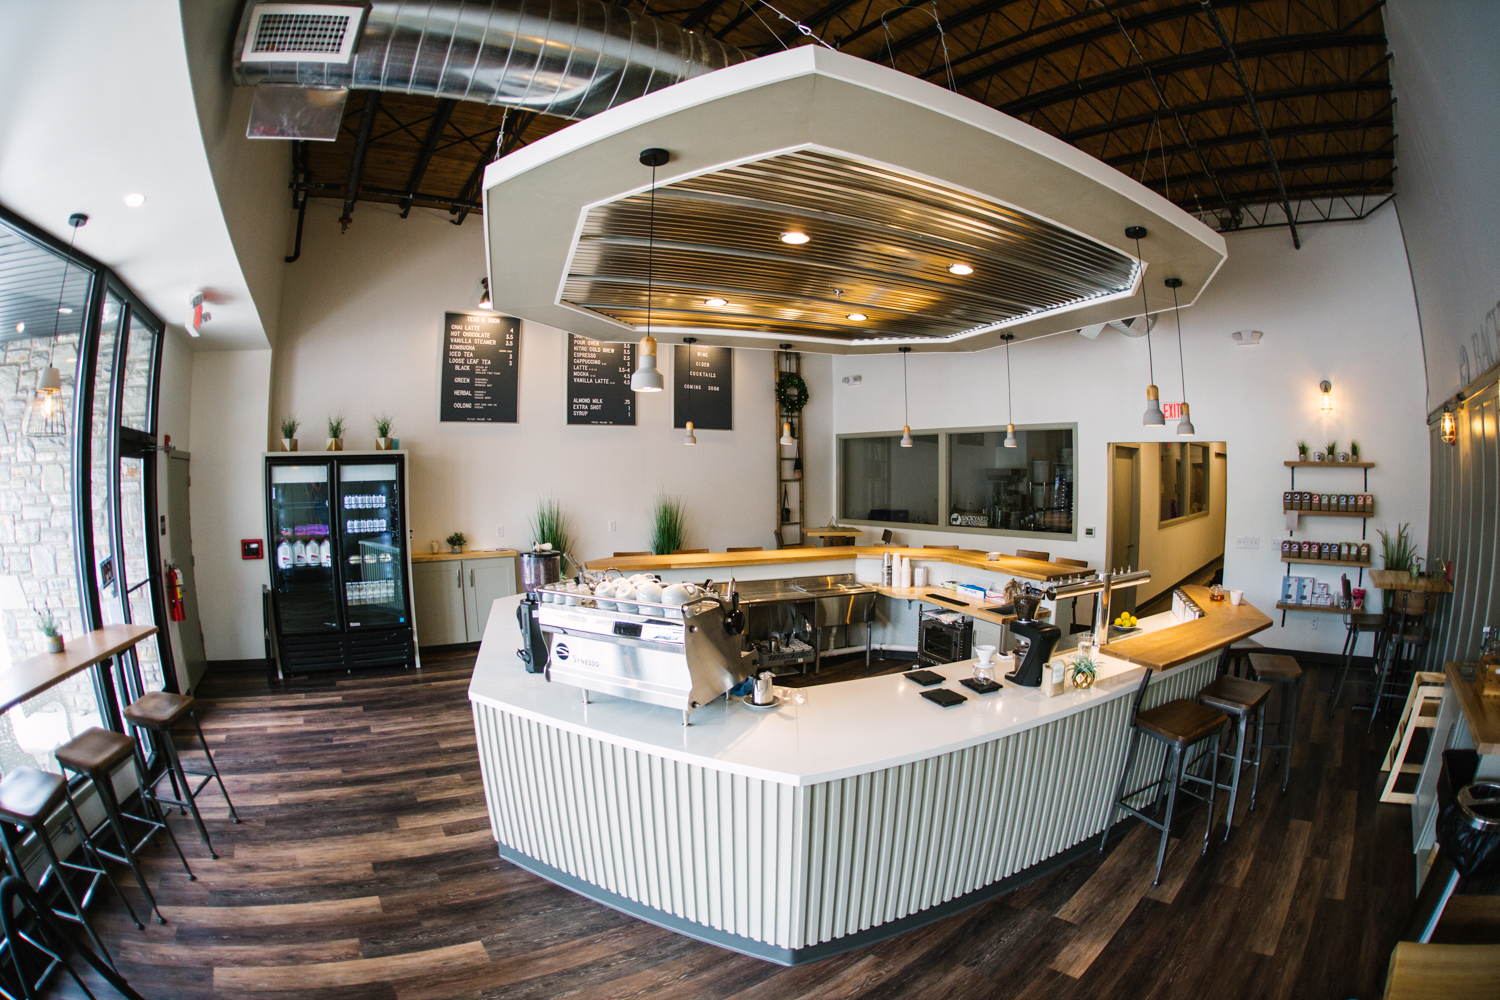 Image of backyard beans coffee bar in Lansdale, PA